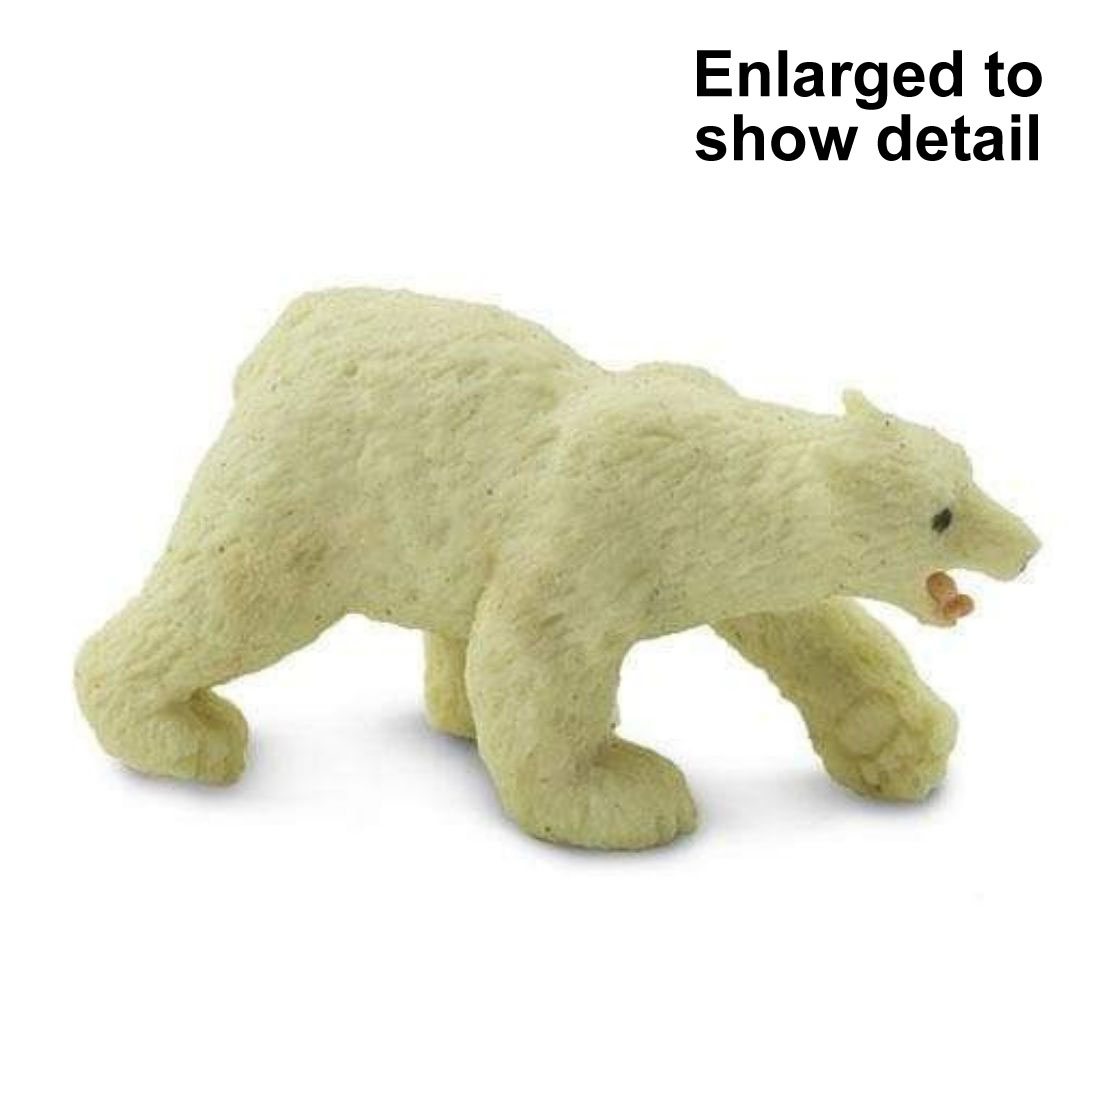 Polar Bear Mini Figurine with the text Enlarged to Show Detail